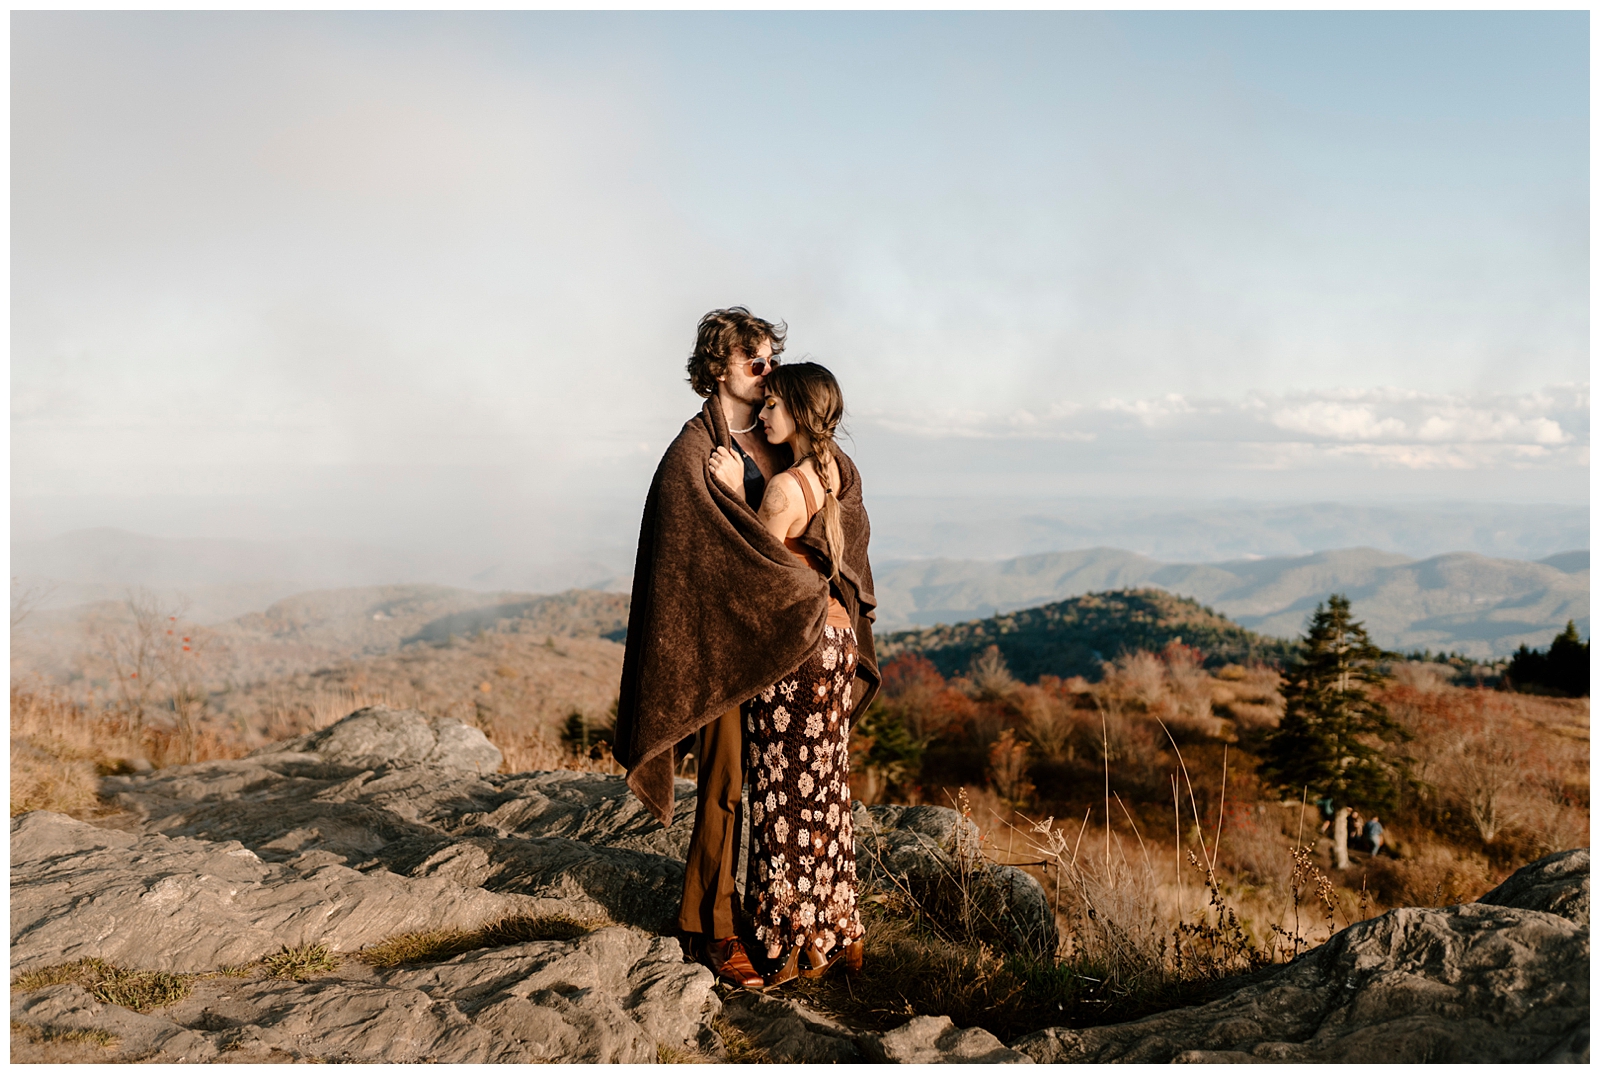 Choosing the perfect mountain views for your engagement session